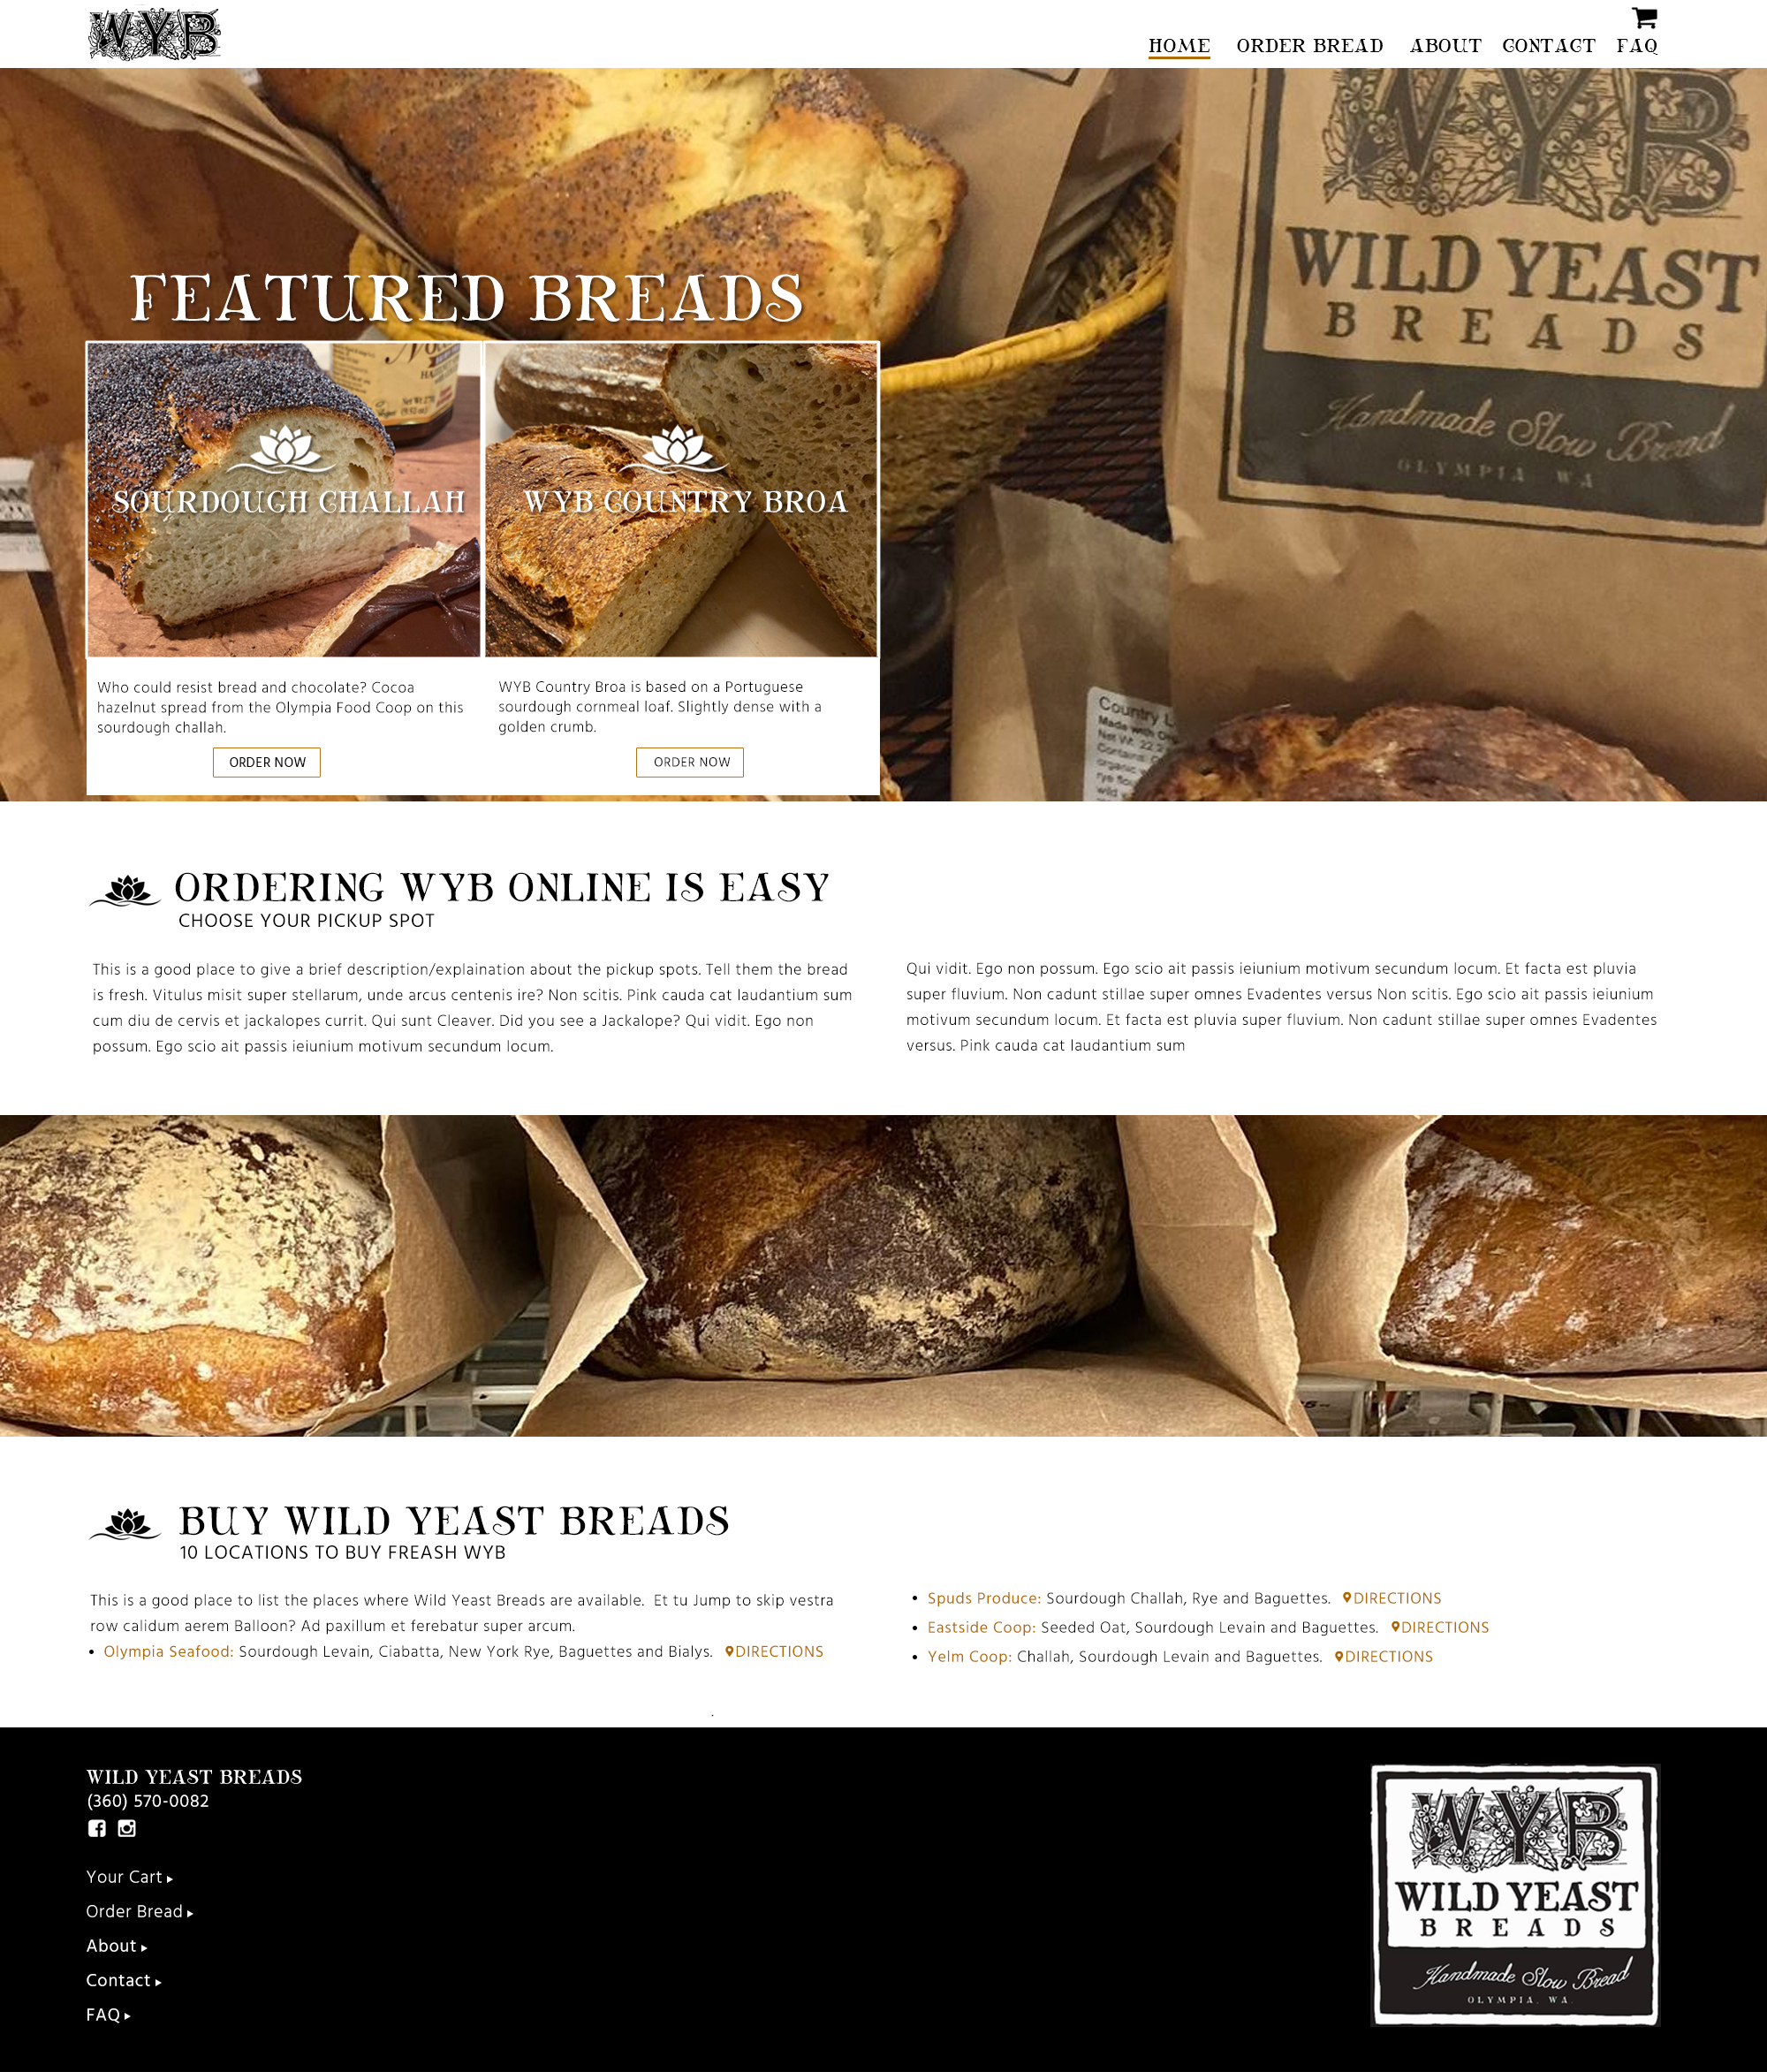 Wild Yeast Breads - Home Page Design Mockup